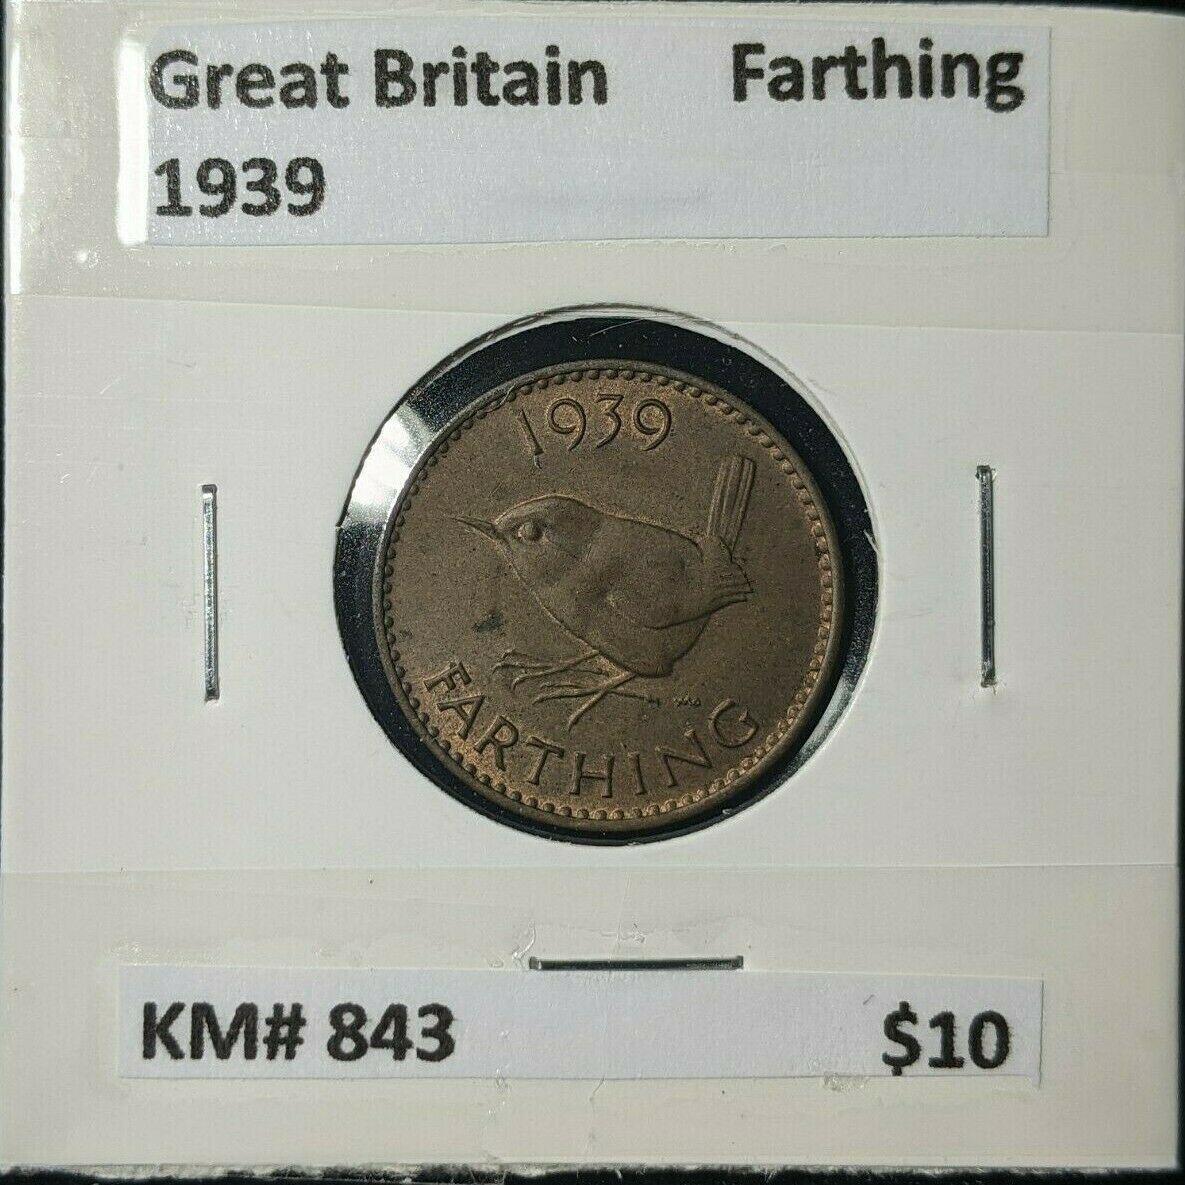 Great Britain 1939 1/4d Farthing KM# 843 #043